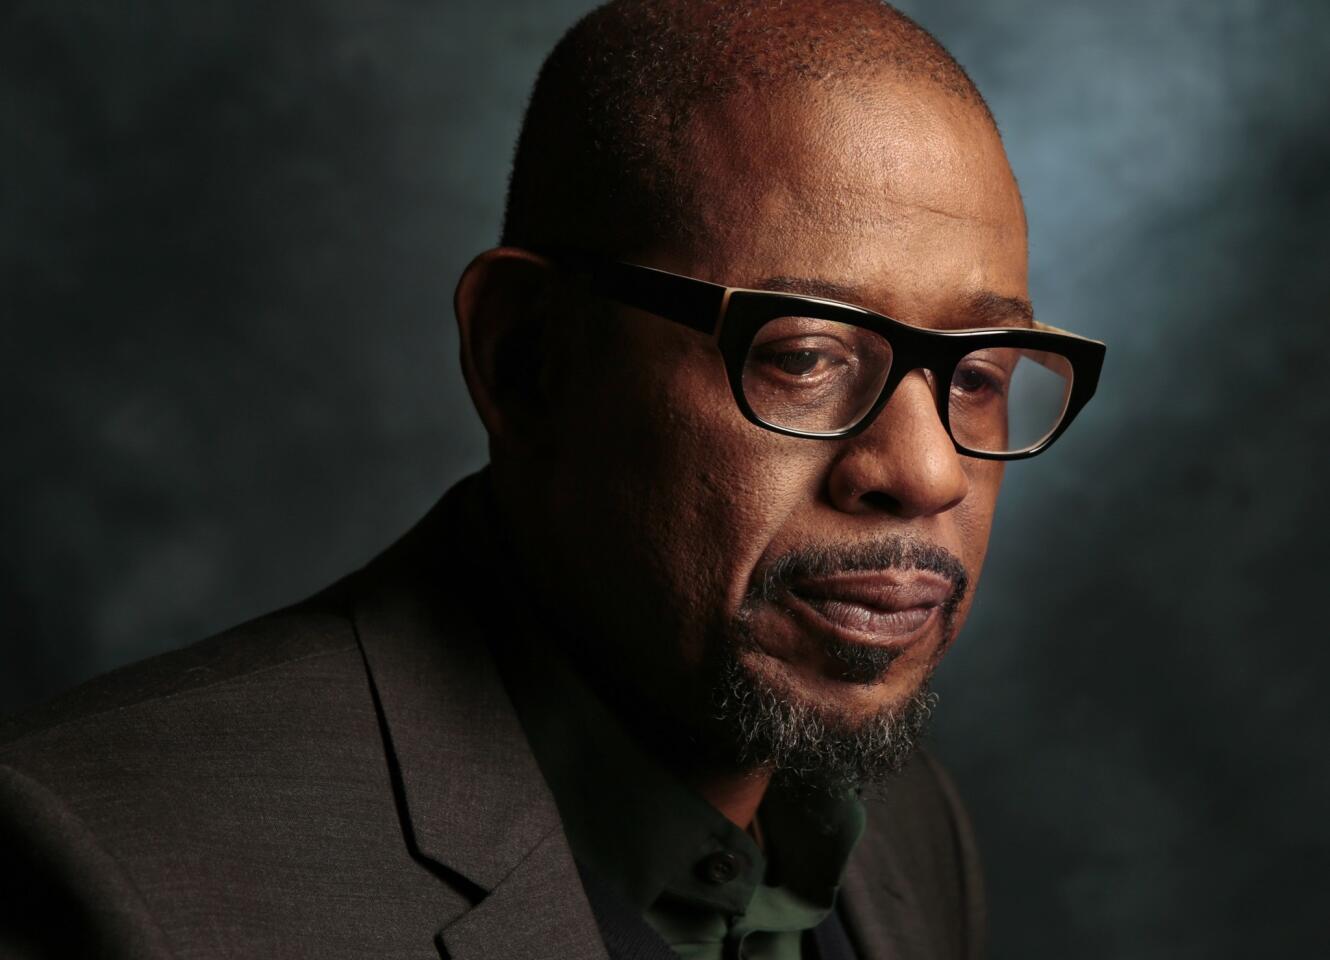 From "The King of Scotland" to "The Butler," here's a look at some of Forest Whitaker's memorable movie roles throughout the years. By Christy Khoshaba